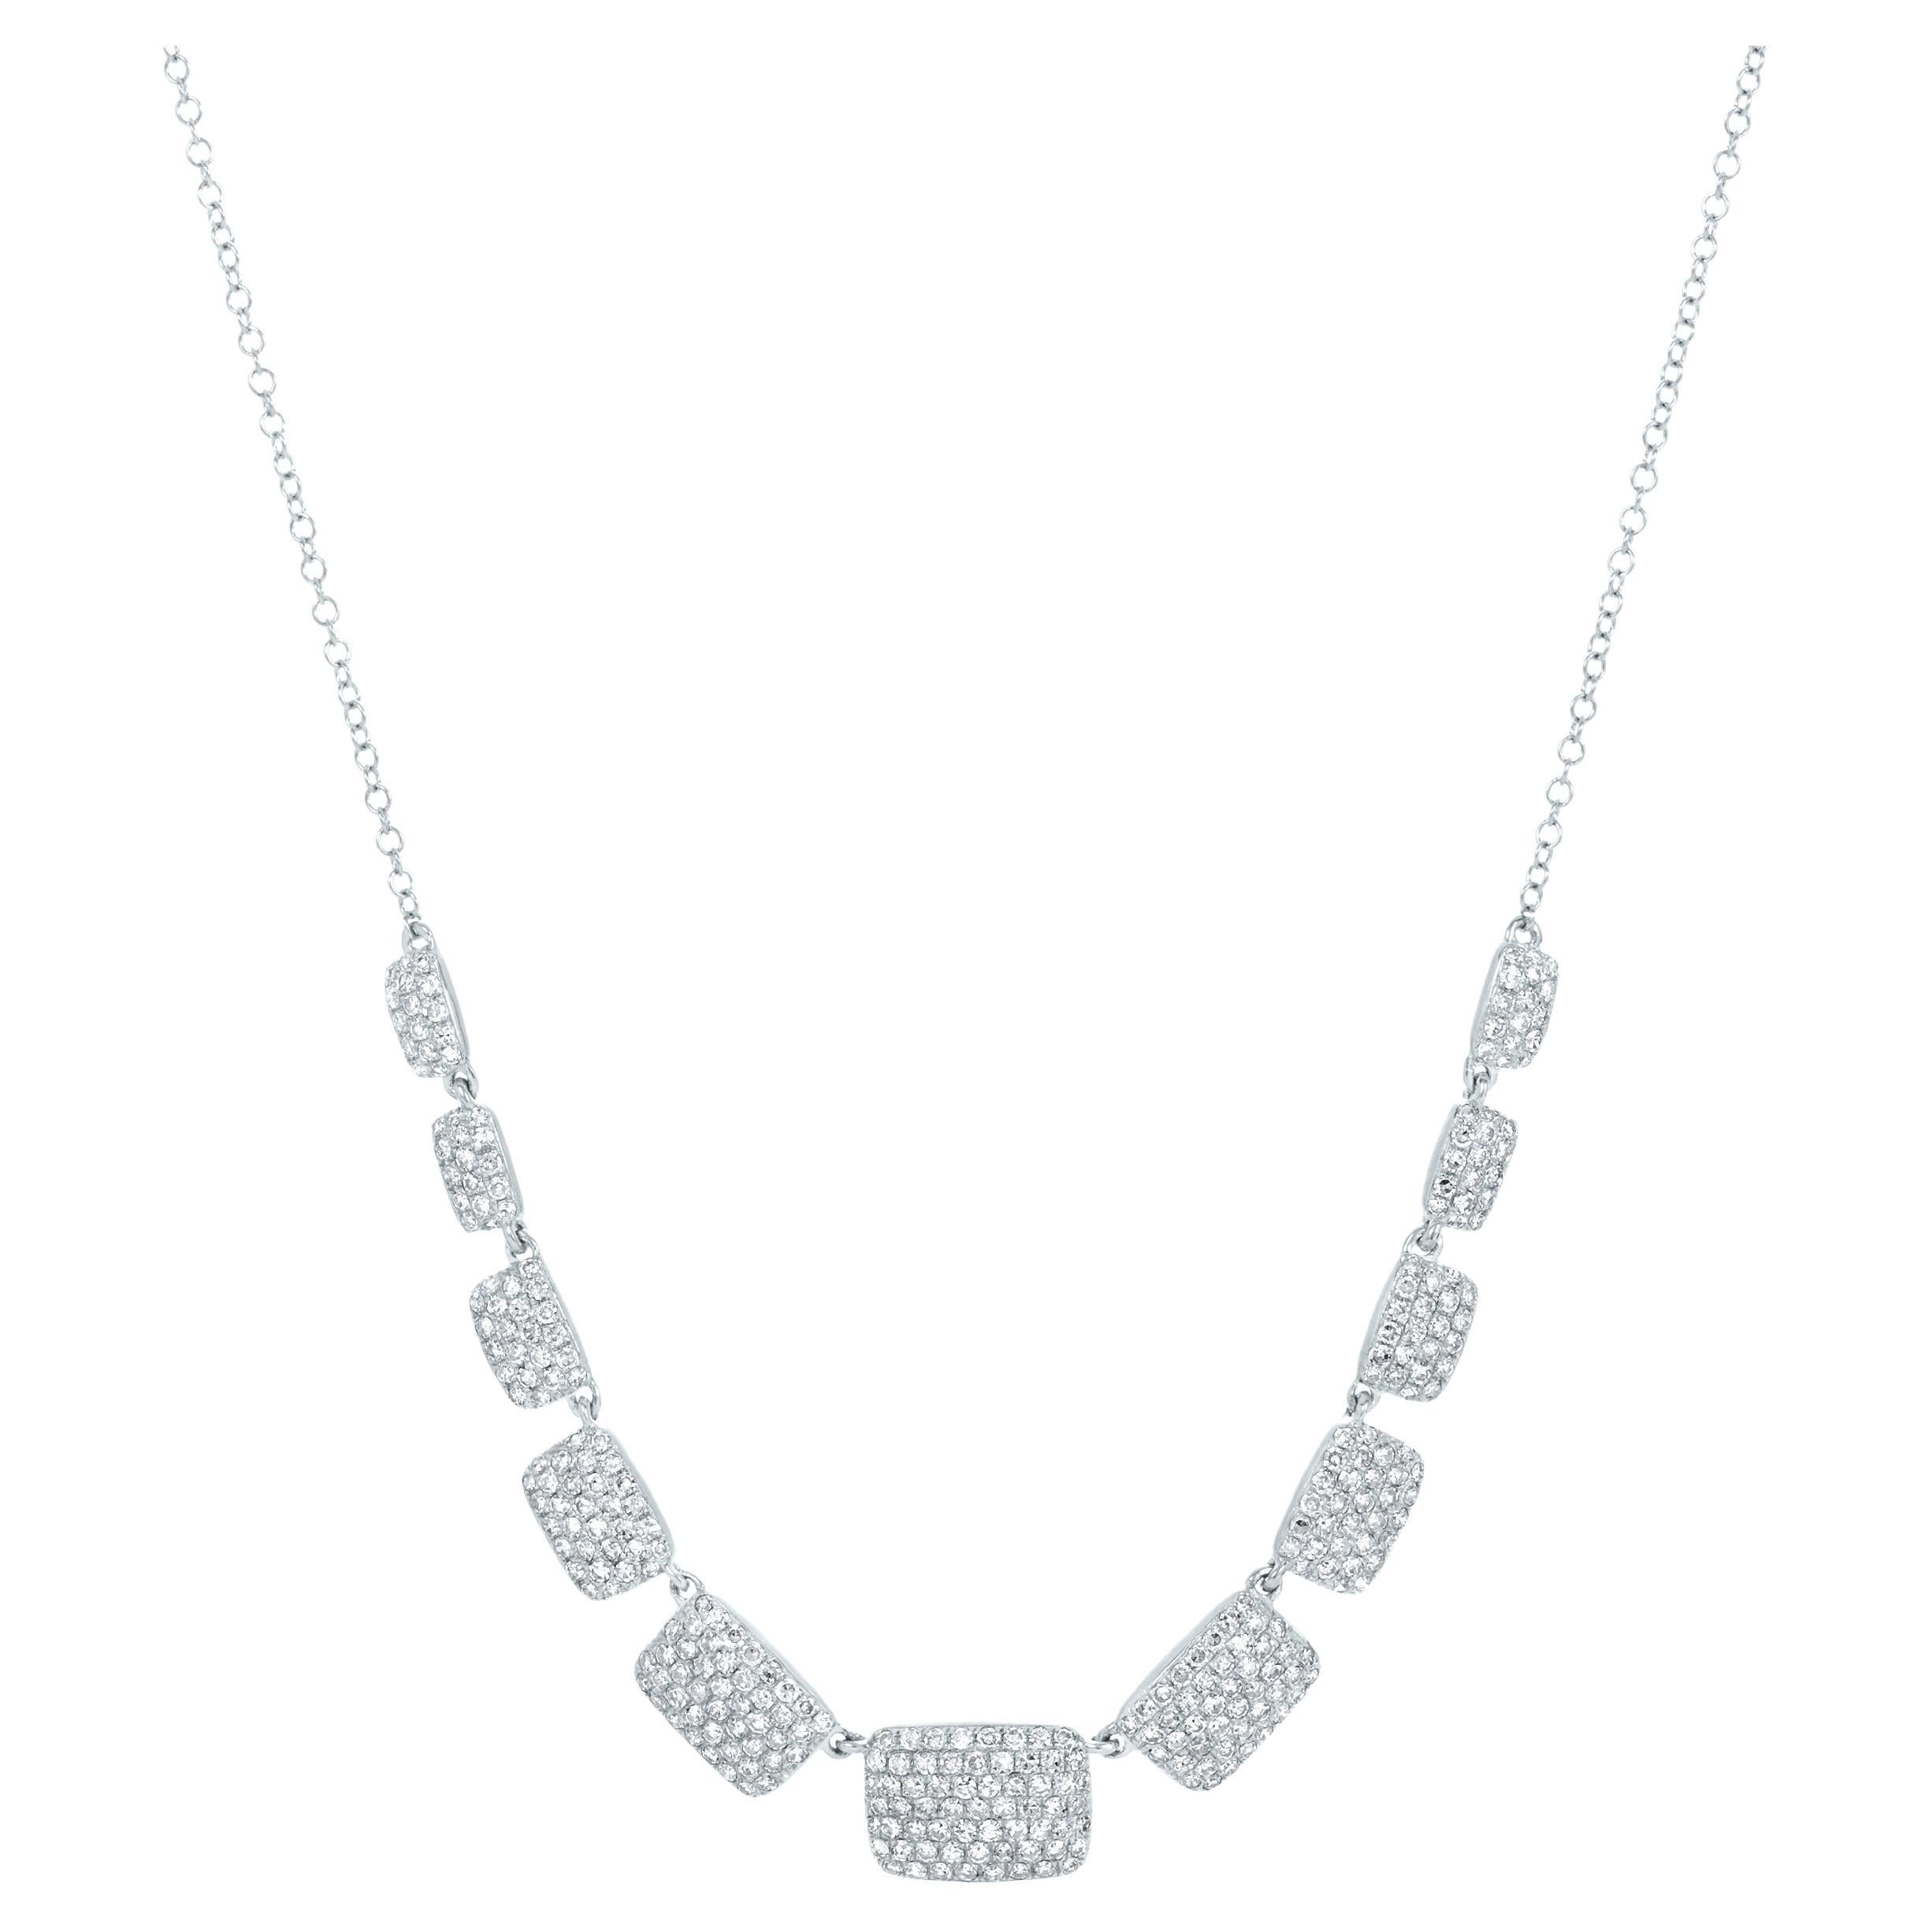 Luxle Classic 0.89cttw Diamond Statement Necklace in 14k White Gold For Sale